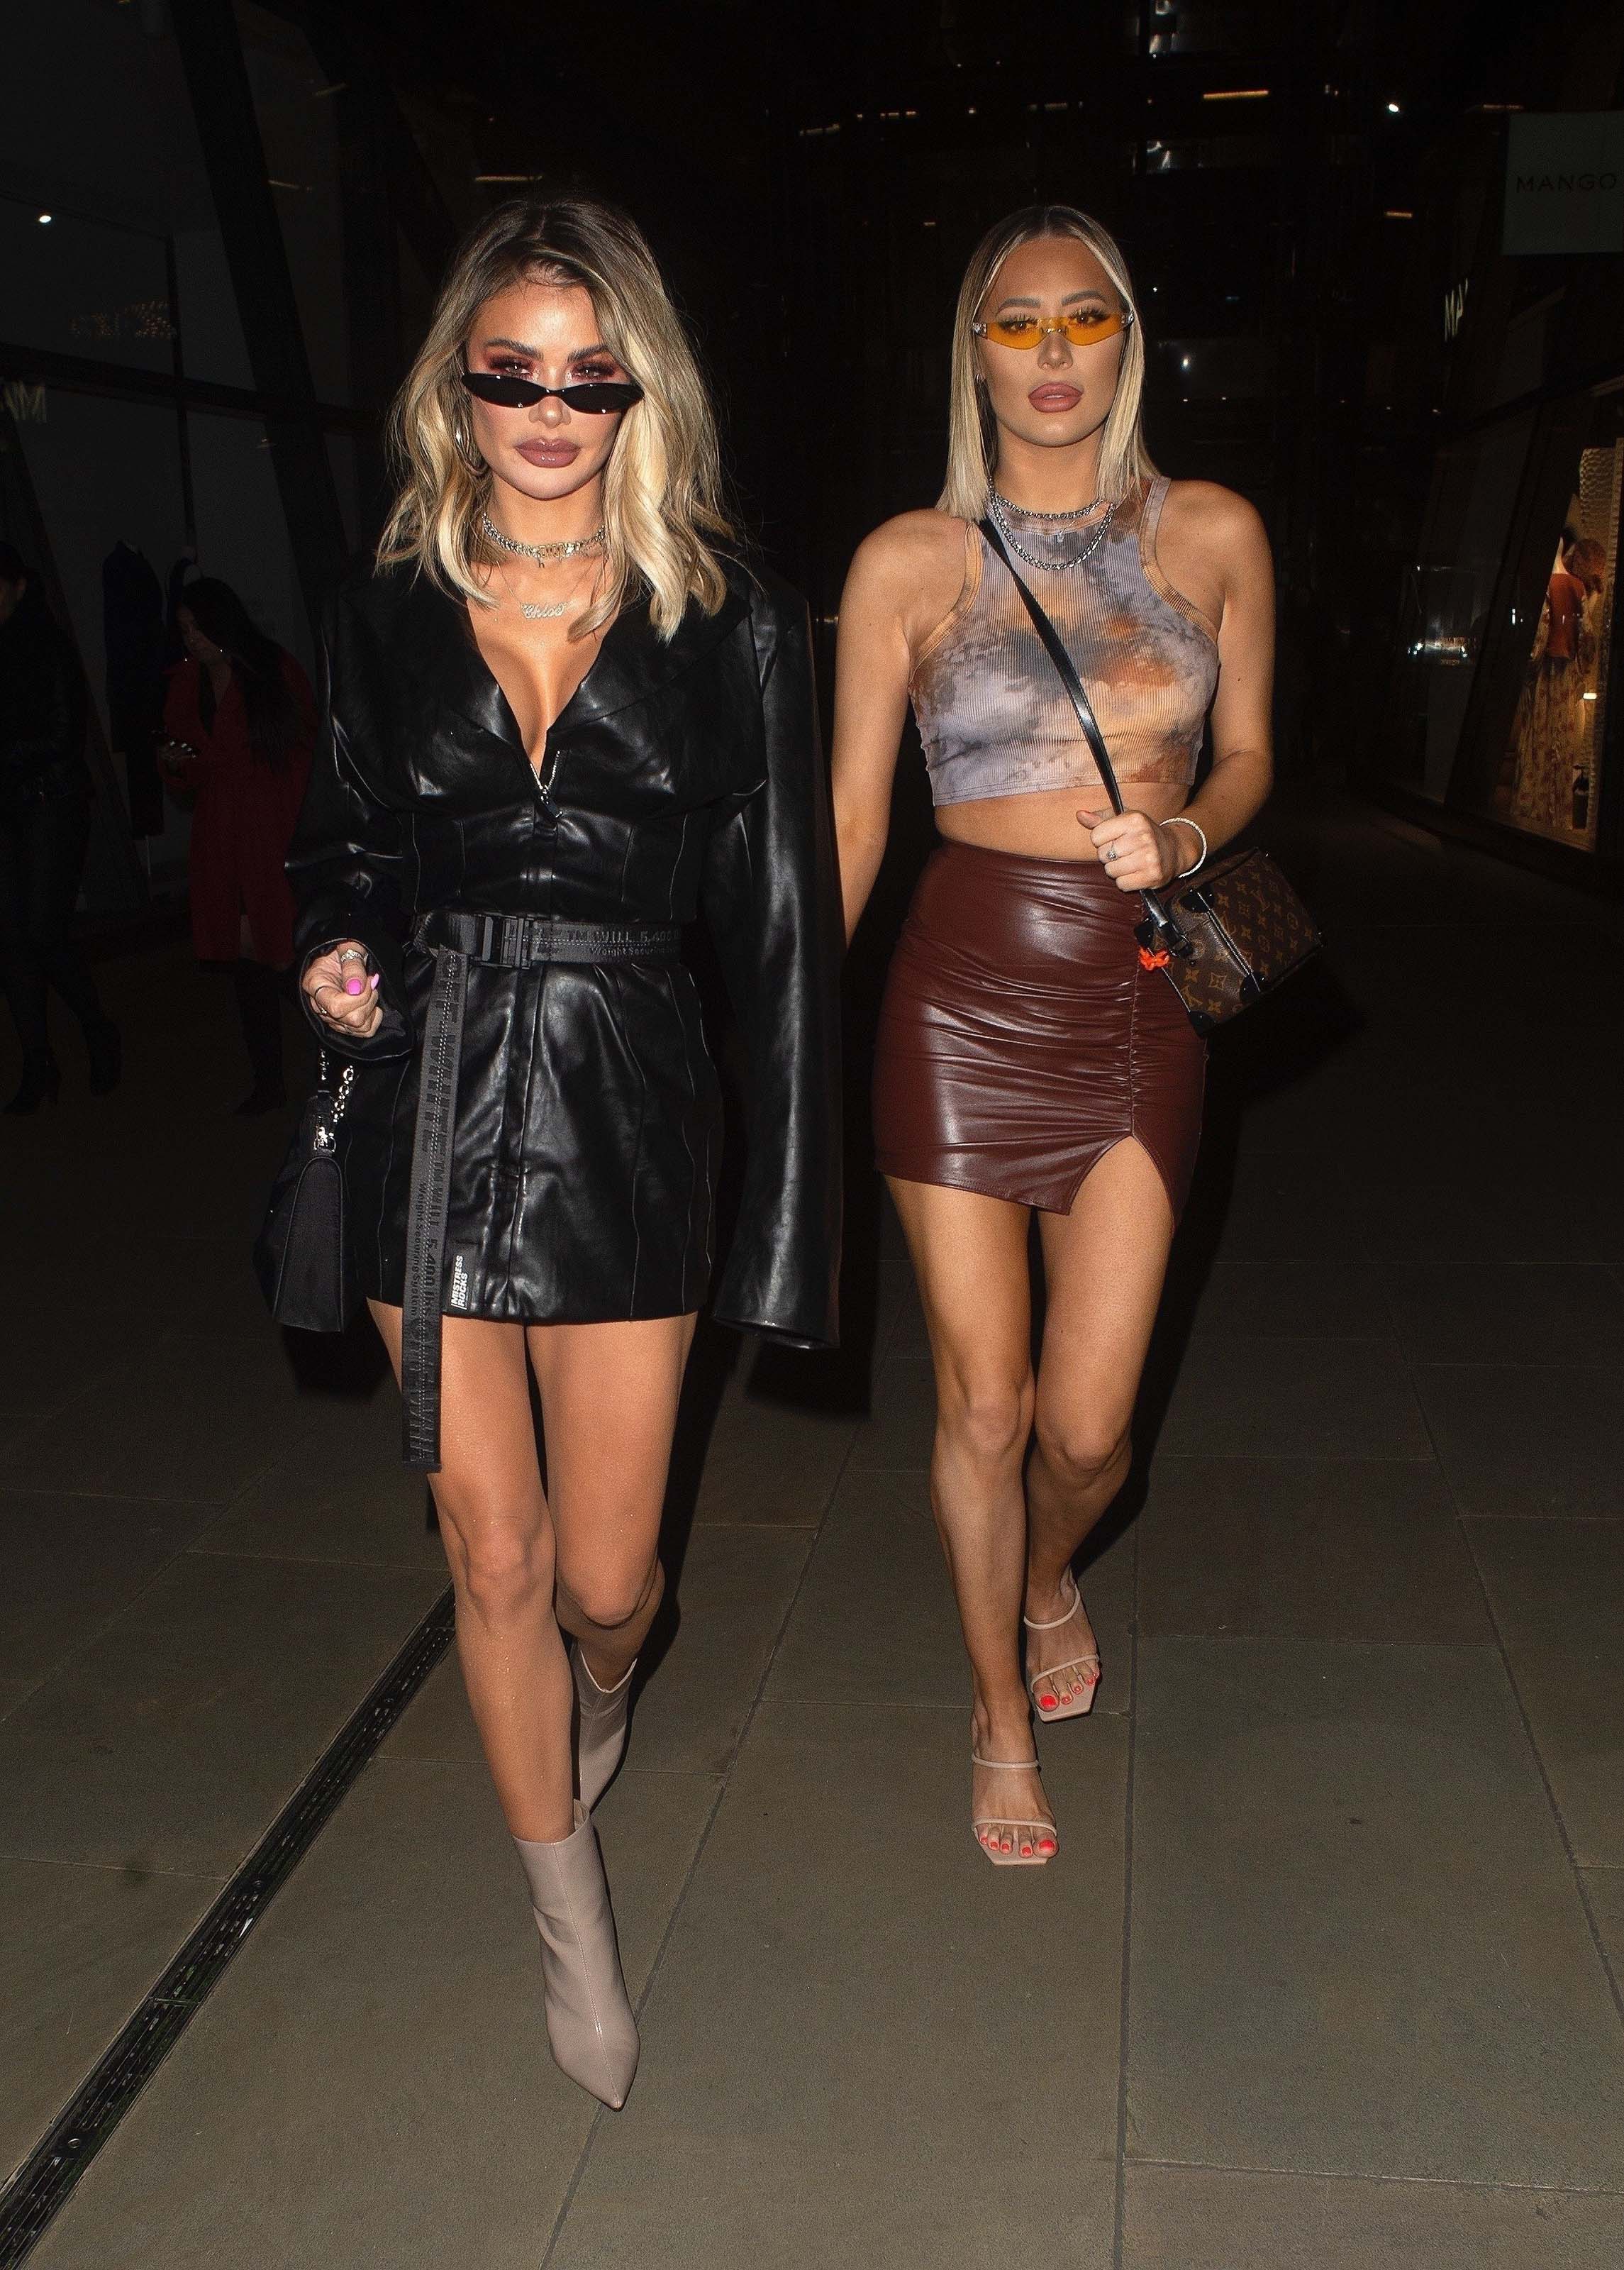 Demi and Chloe Sims at The Ivy Asia St Paul’s